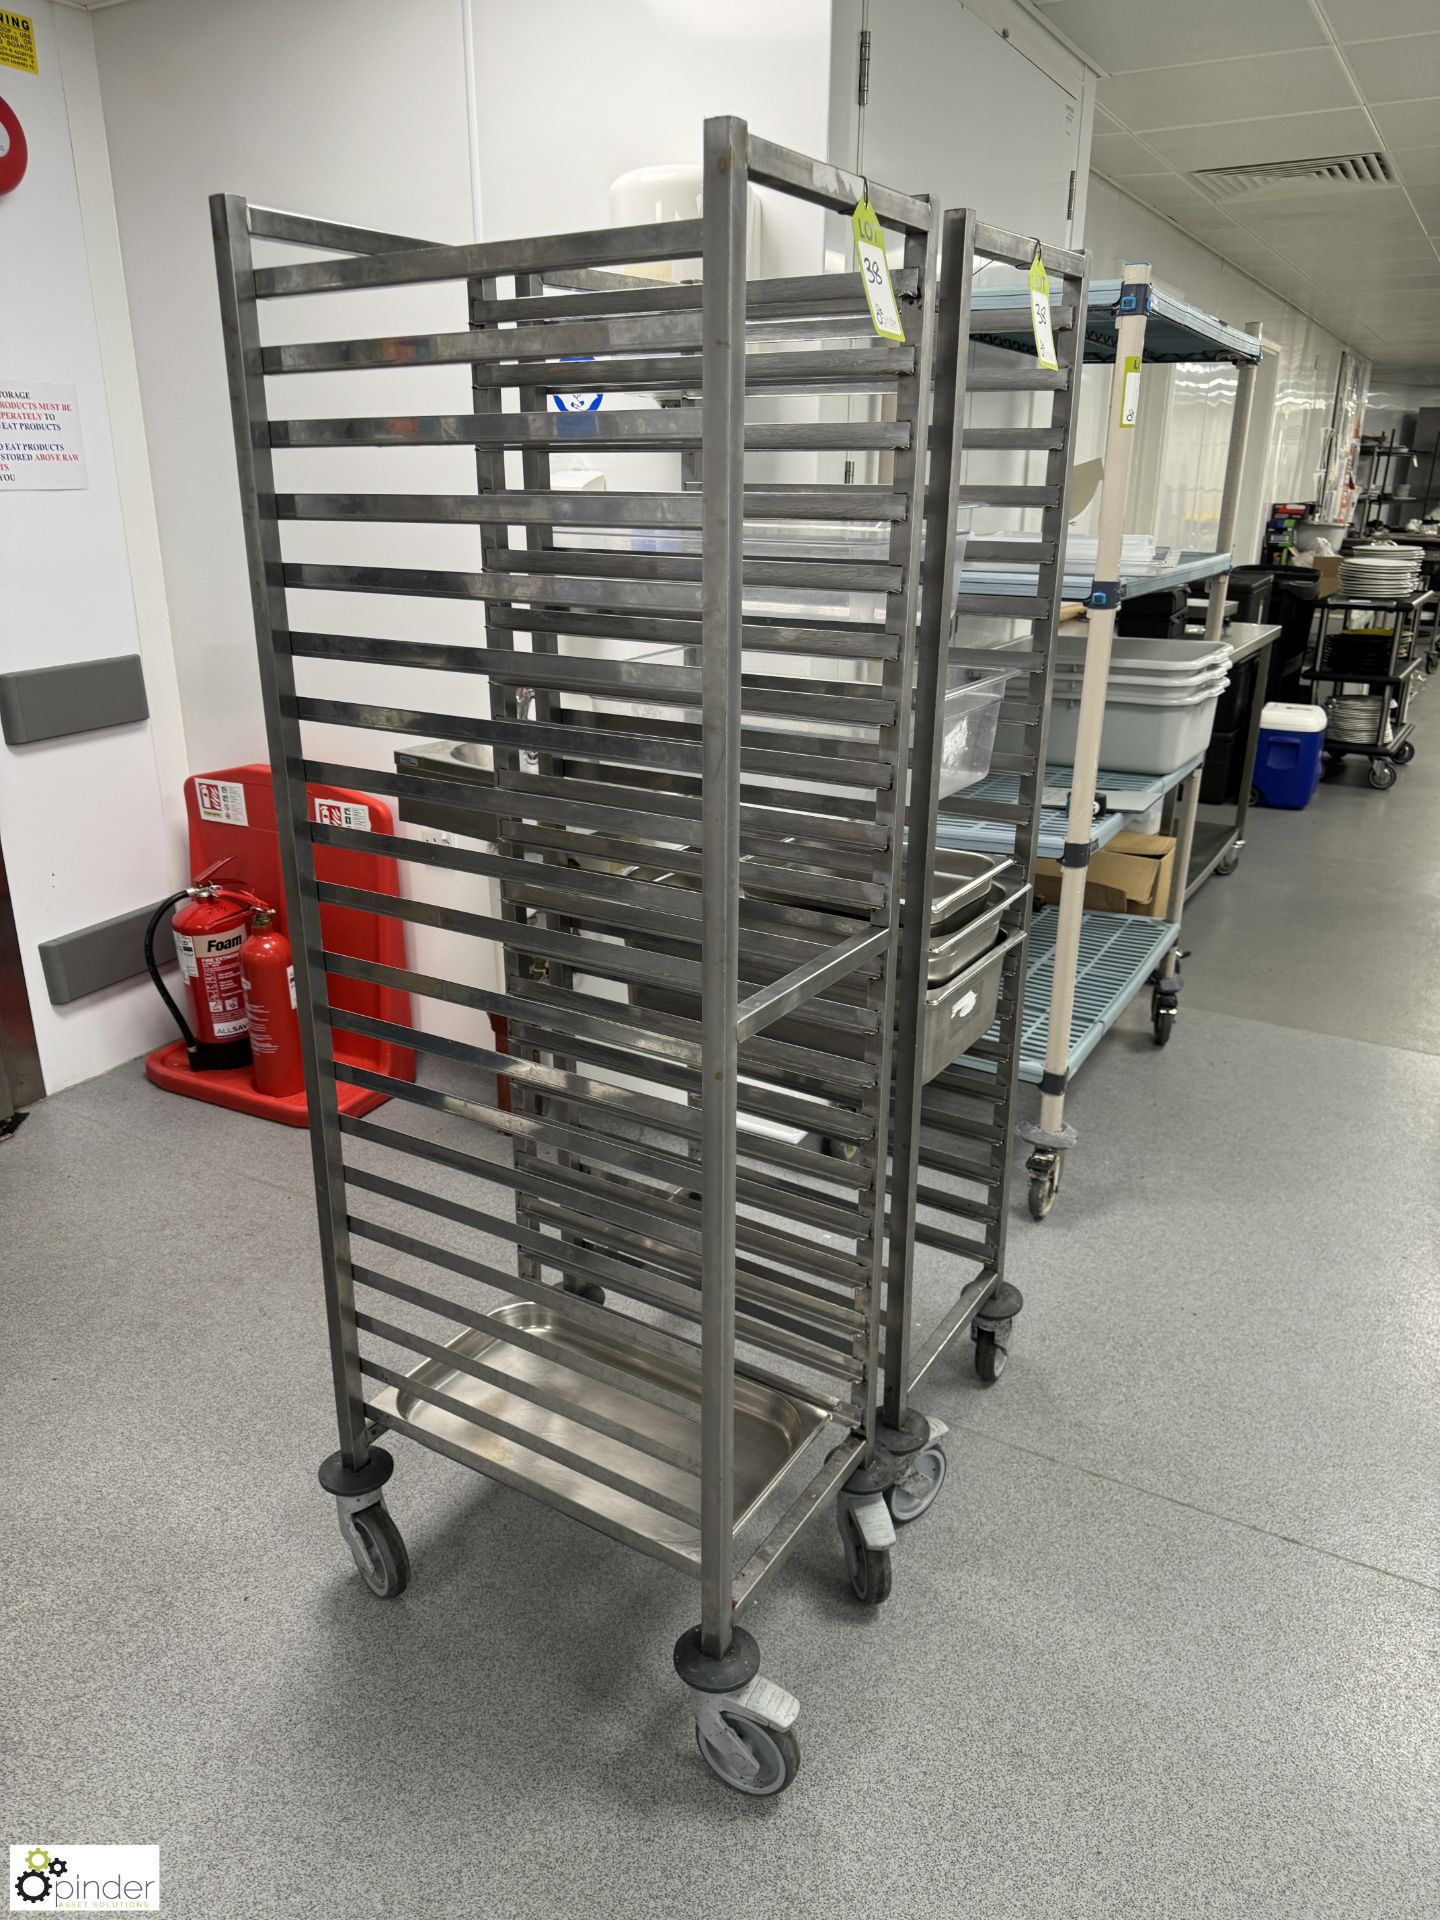 2 stainless steel multi tray Trolleys (location in building – basement kitchen 2) - Image 2 of 4